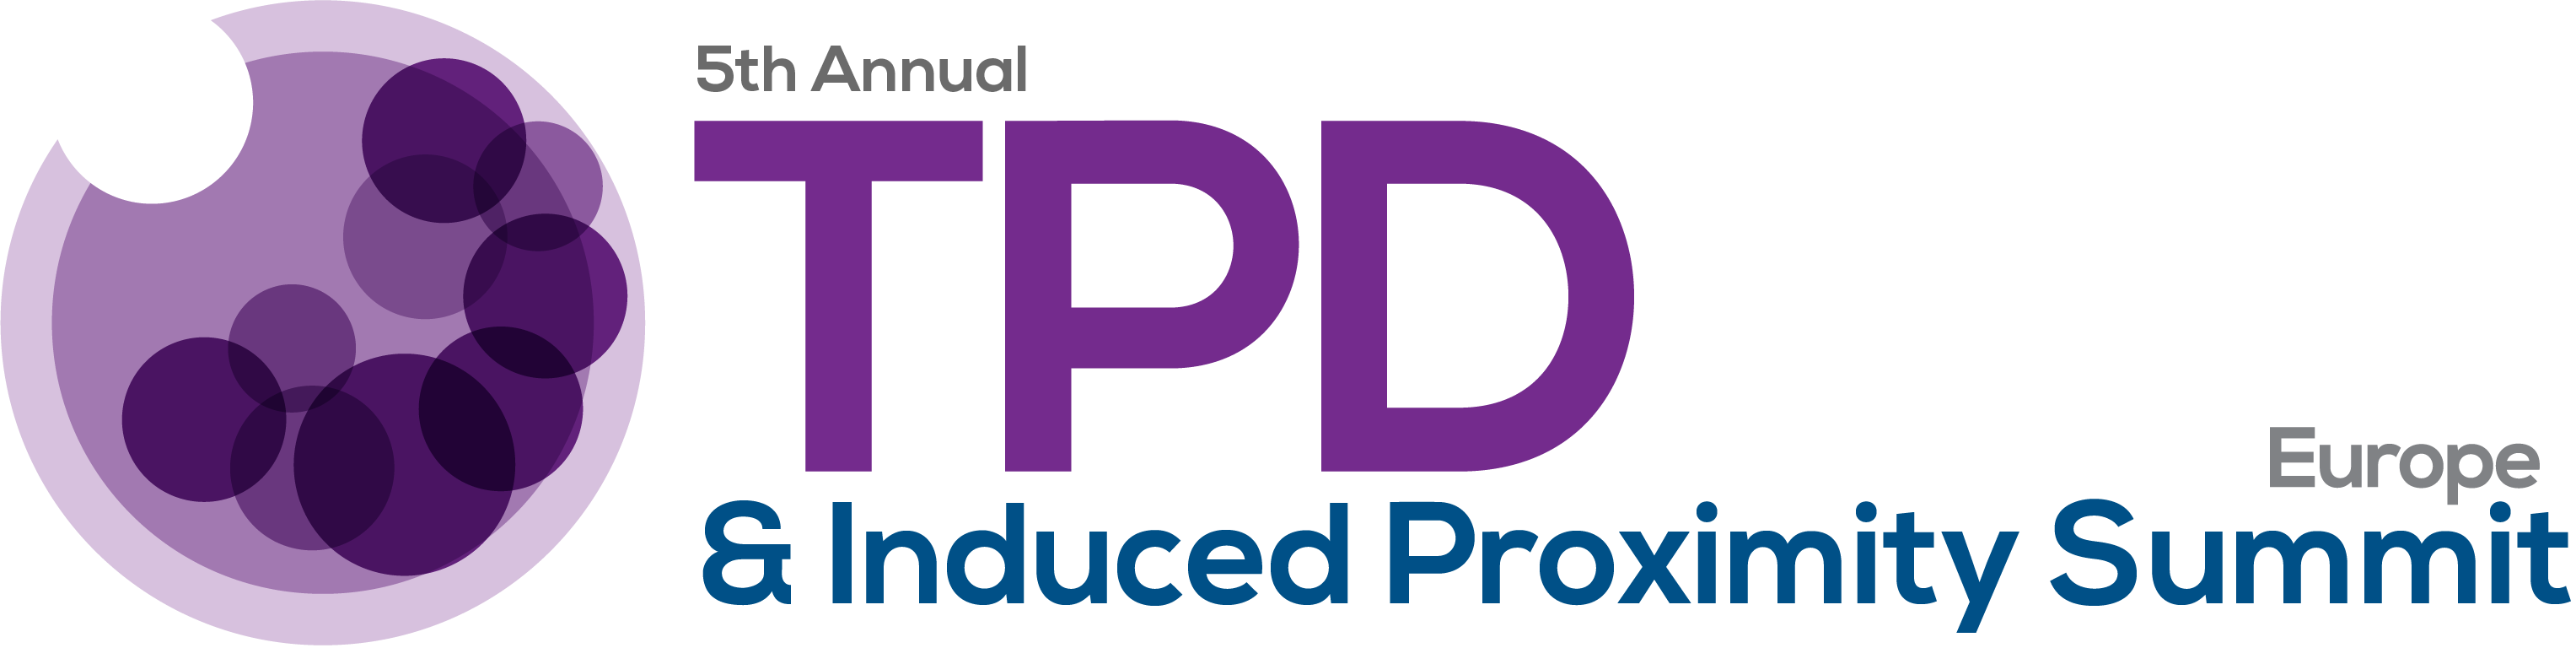 5th TPD Targeted Protein Degredation Summit Europe